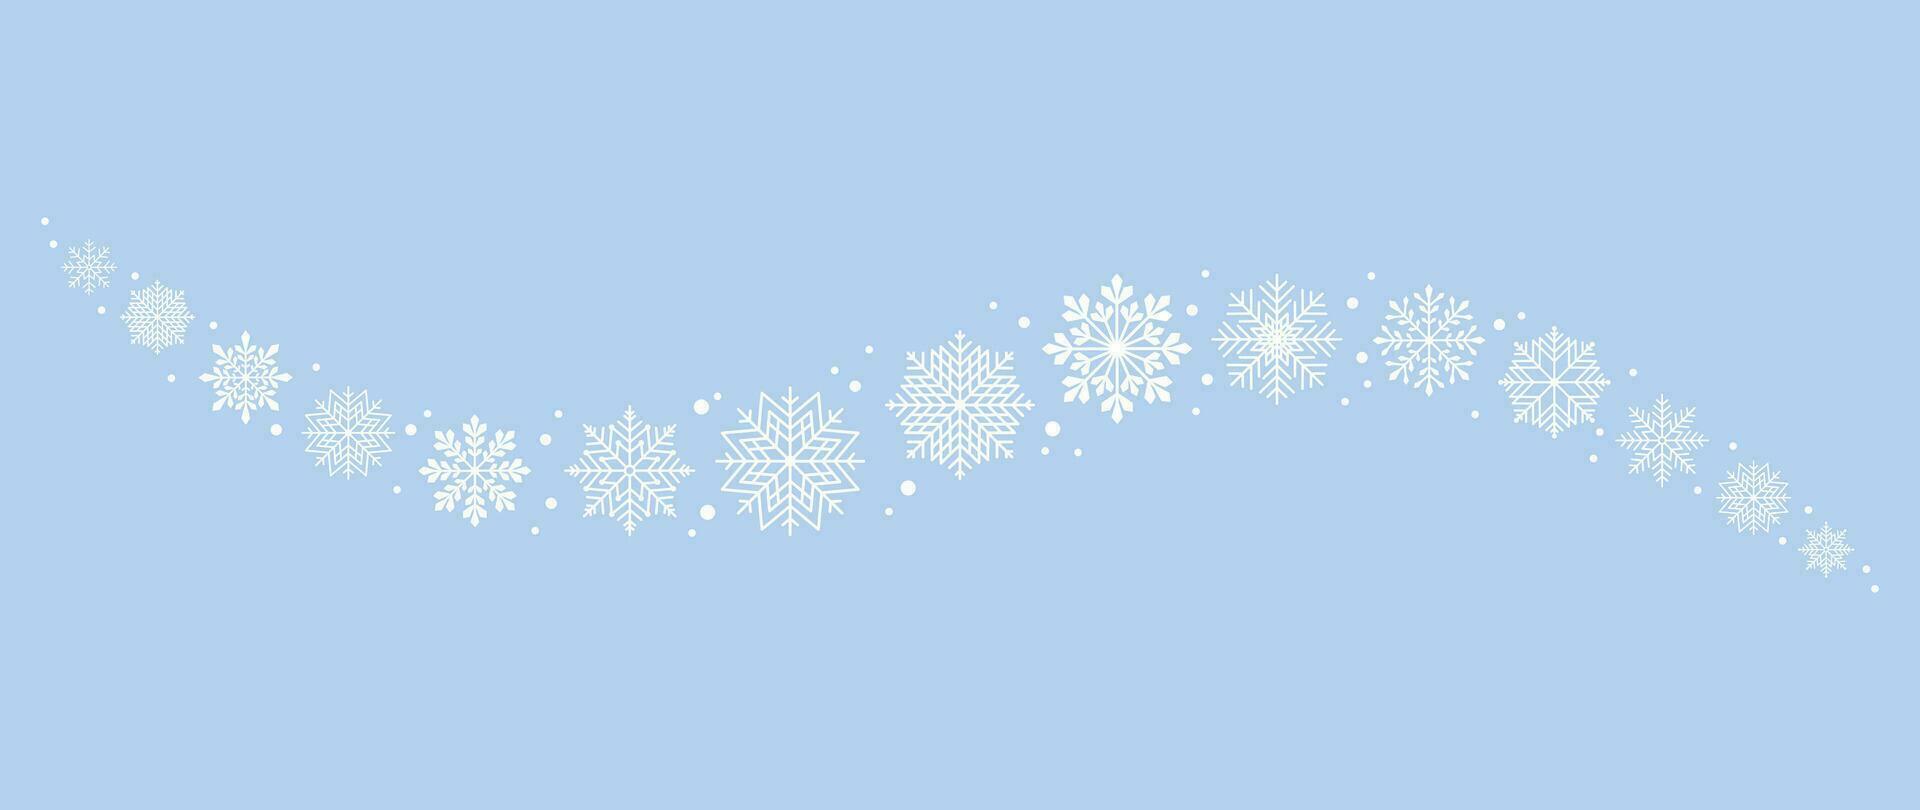 Winter background with snowflakes and snow. Vector illustration.